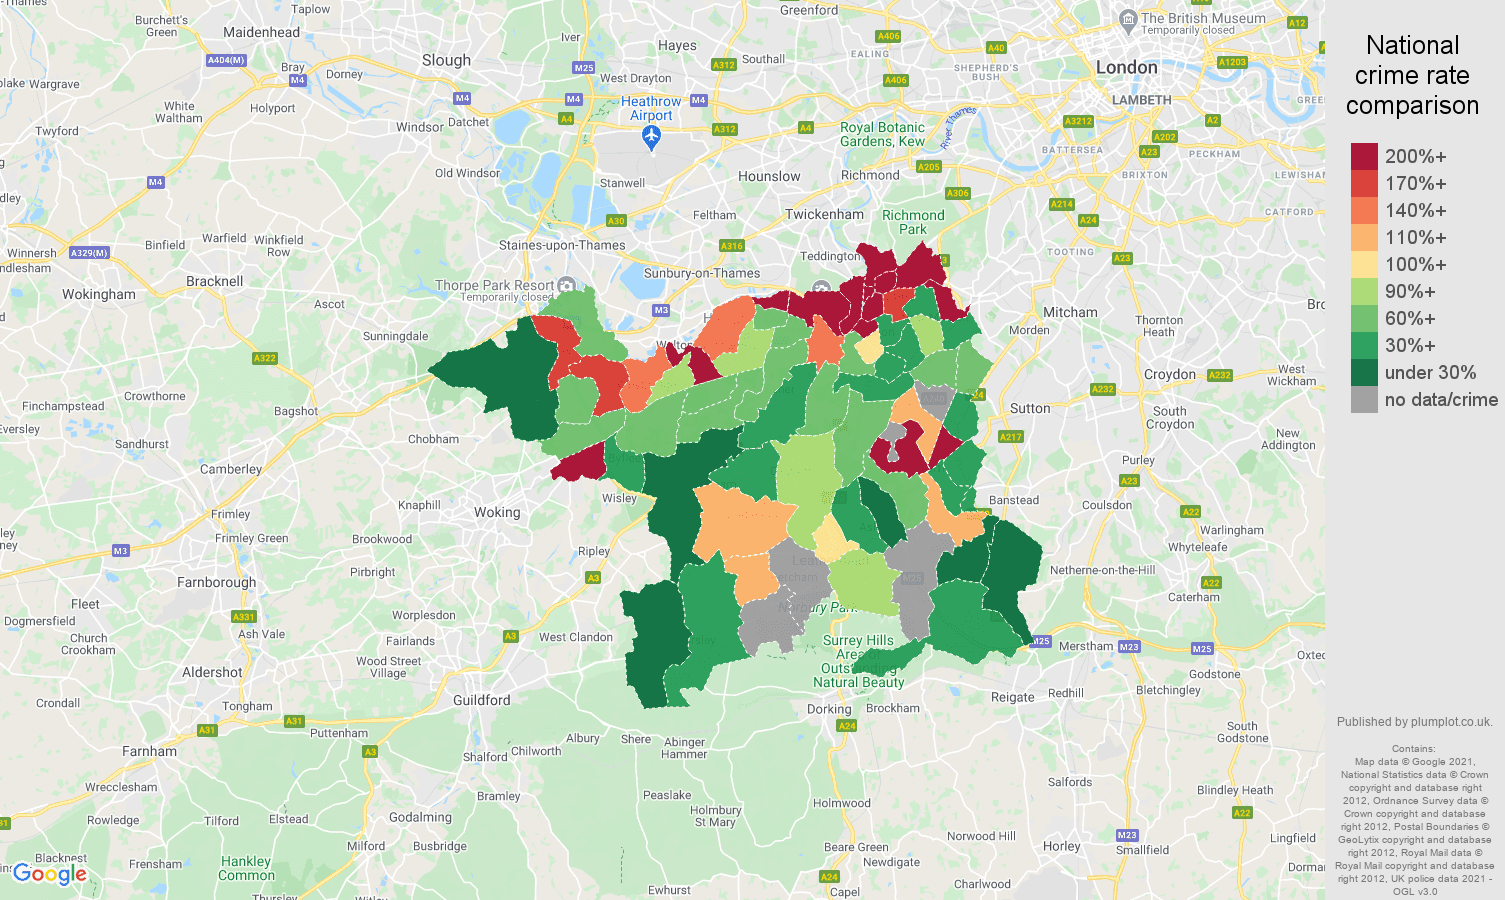 Kingston upon Thames bicycle theft crime rate comparison map